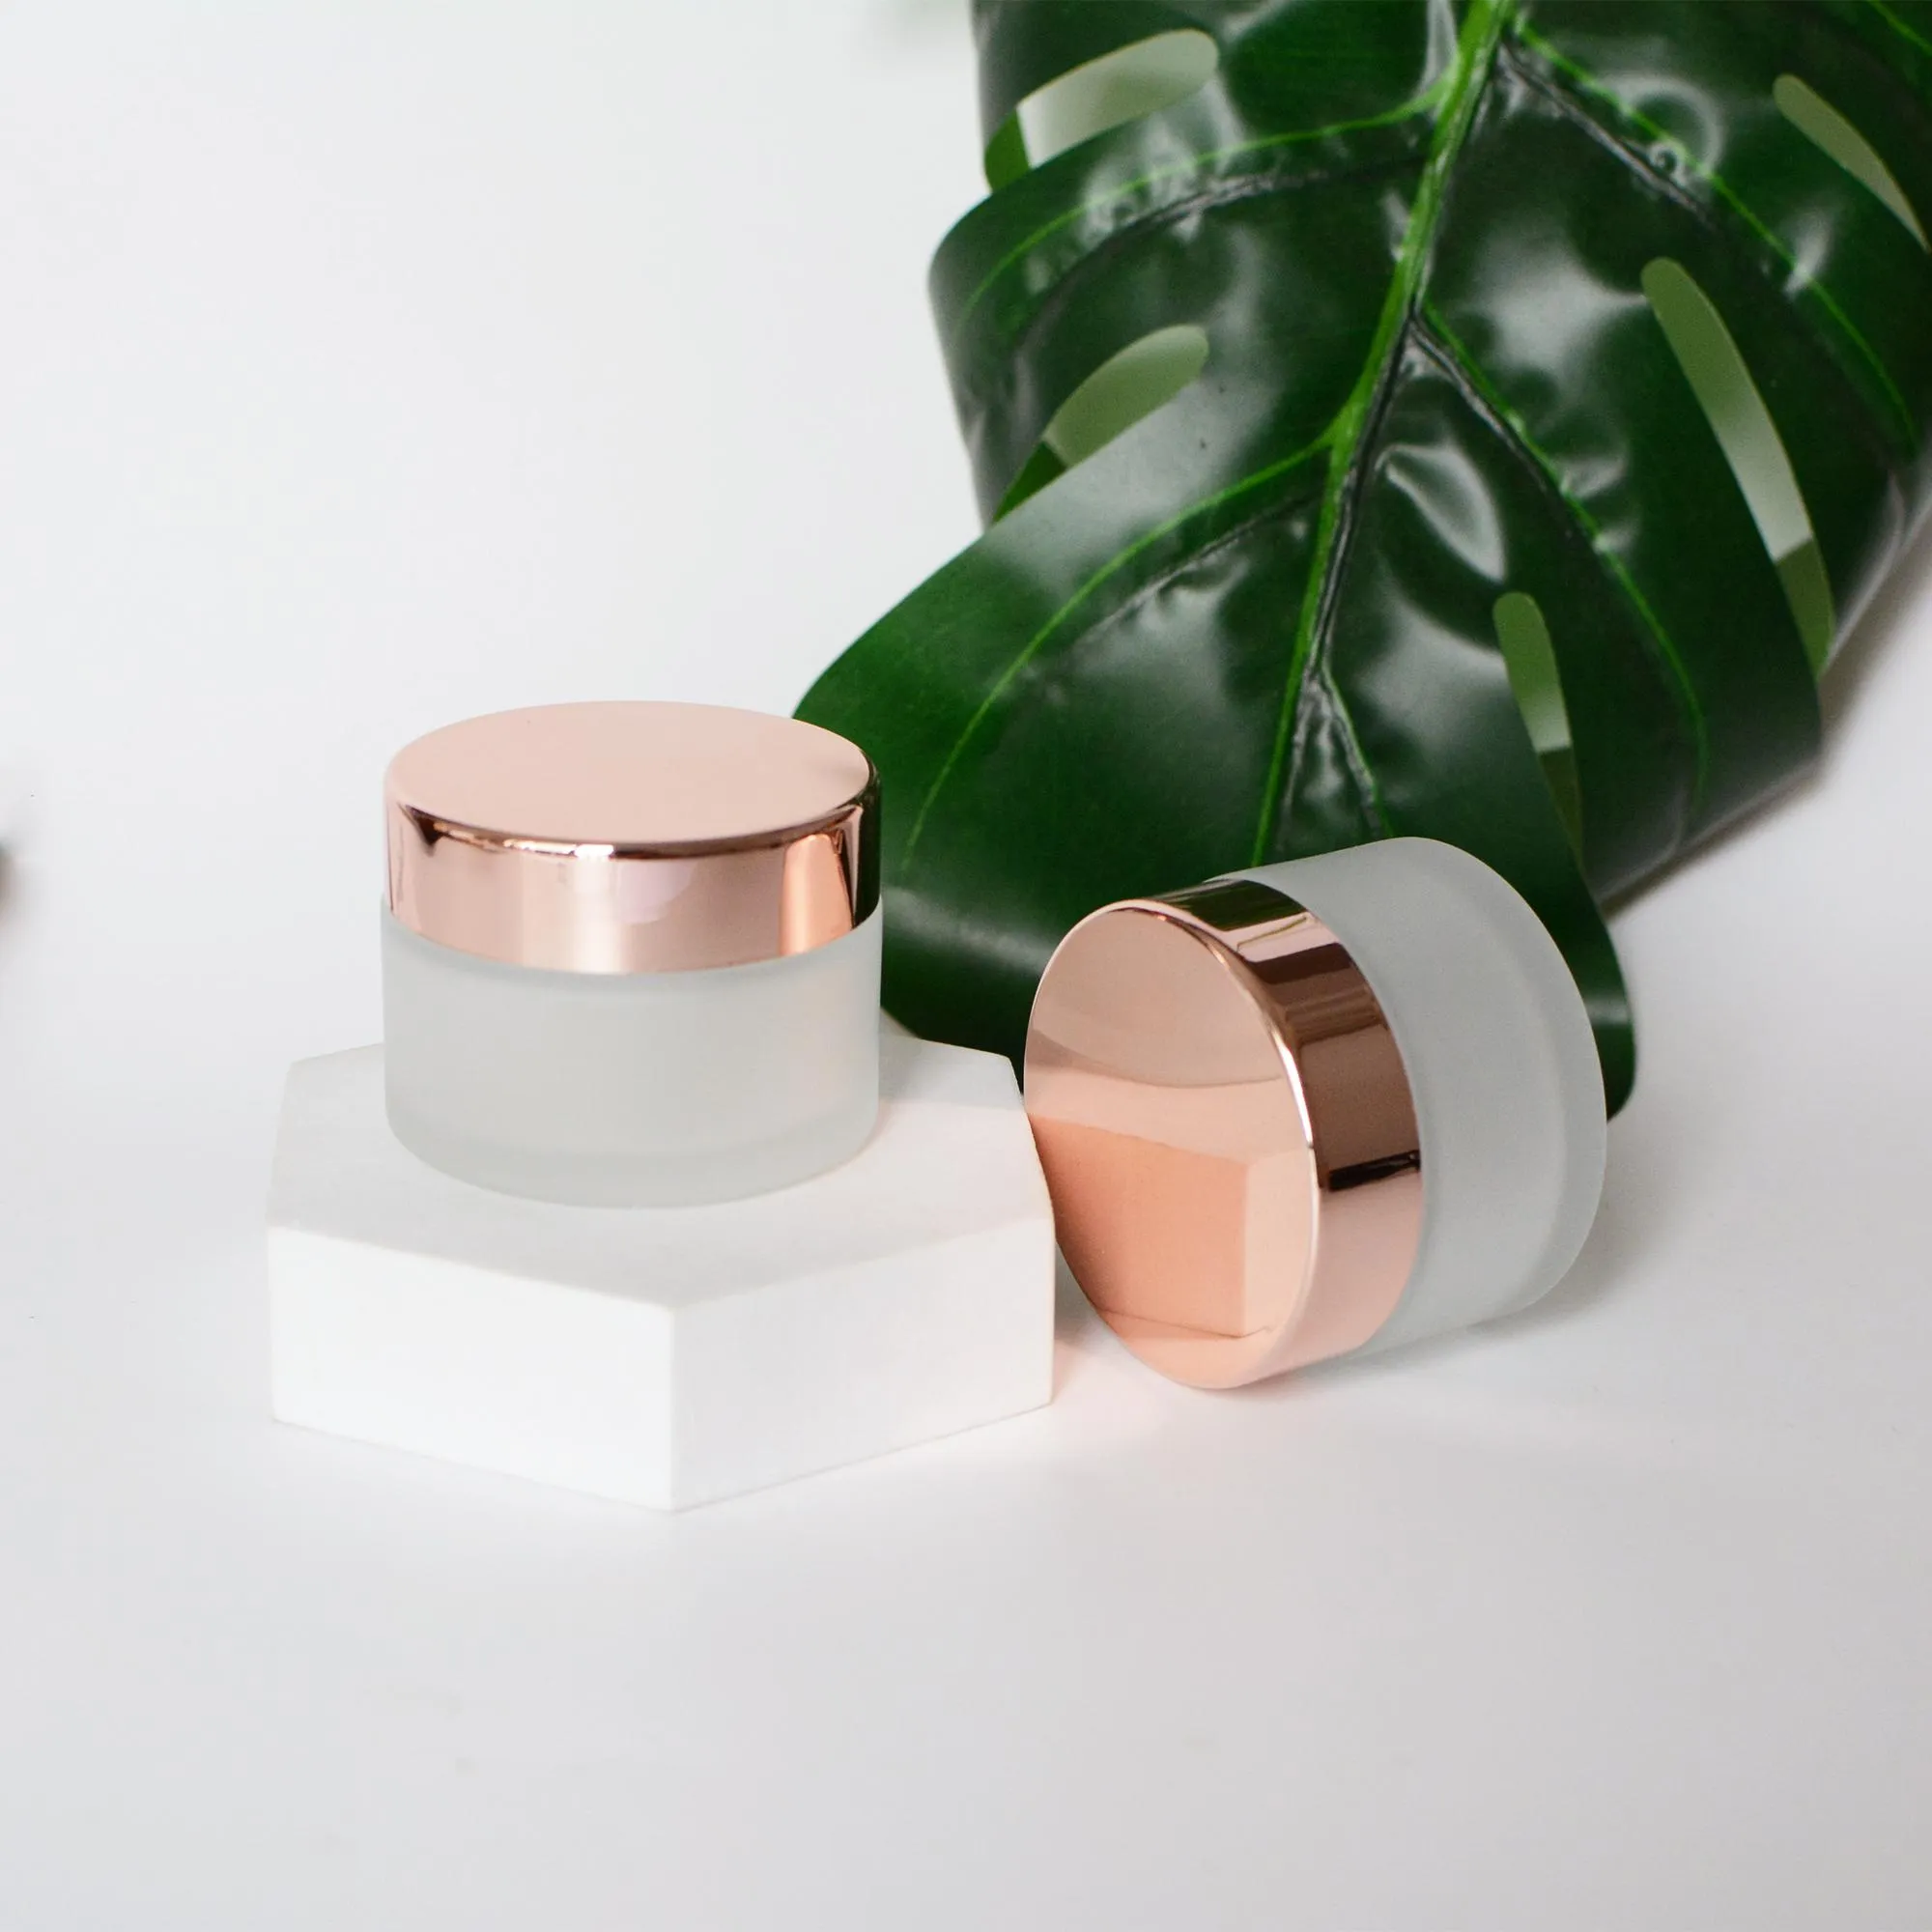 15g 30g 50g 100g 5g Frosted Glass Jar Packaging Bottles with Rose Gold Lids Cosmetic Face Cream Container Storage